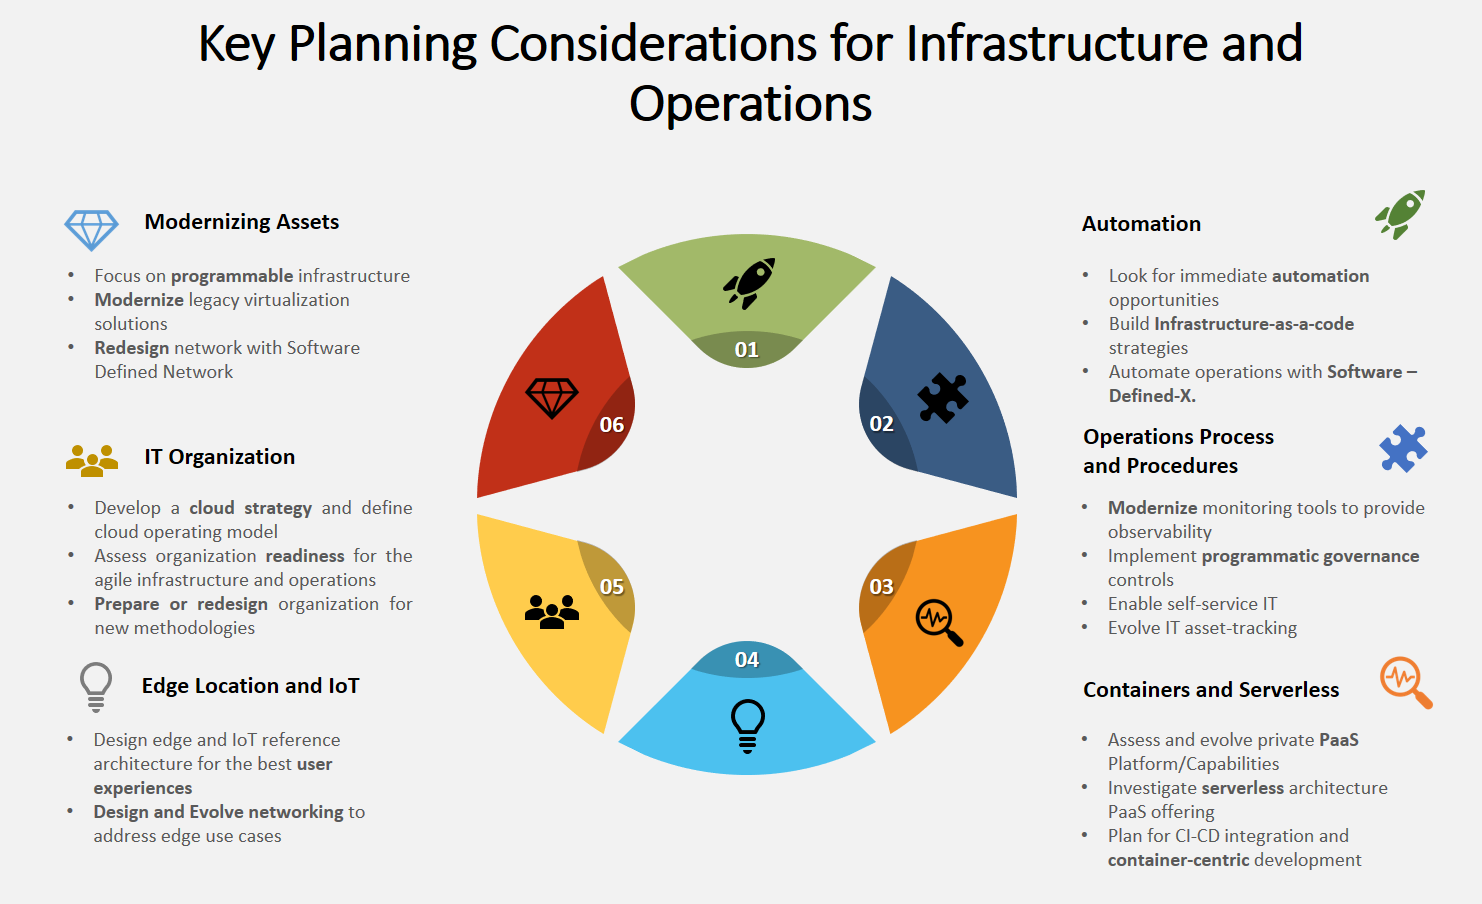 Key planning considerations for Infrastructure and Operations in 2020.